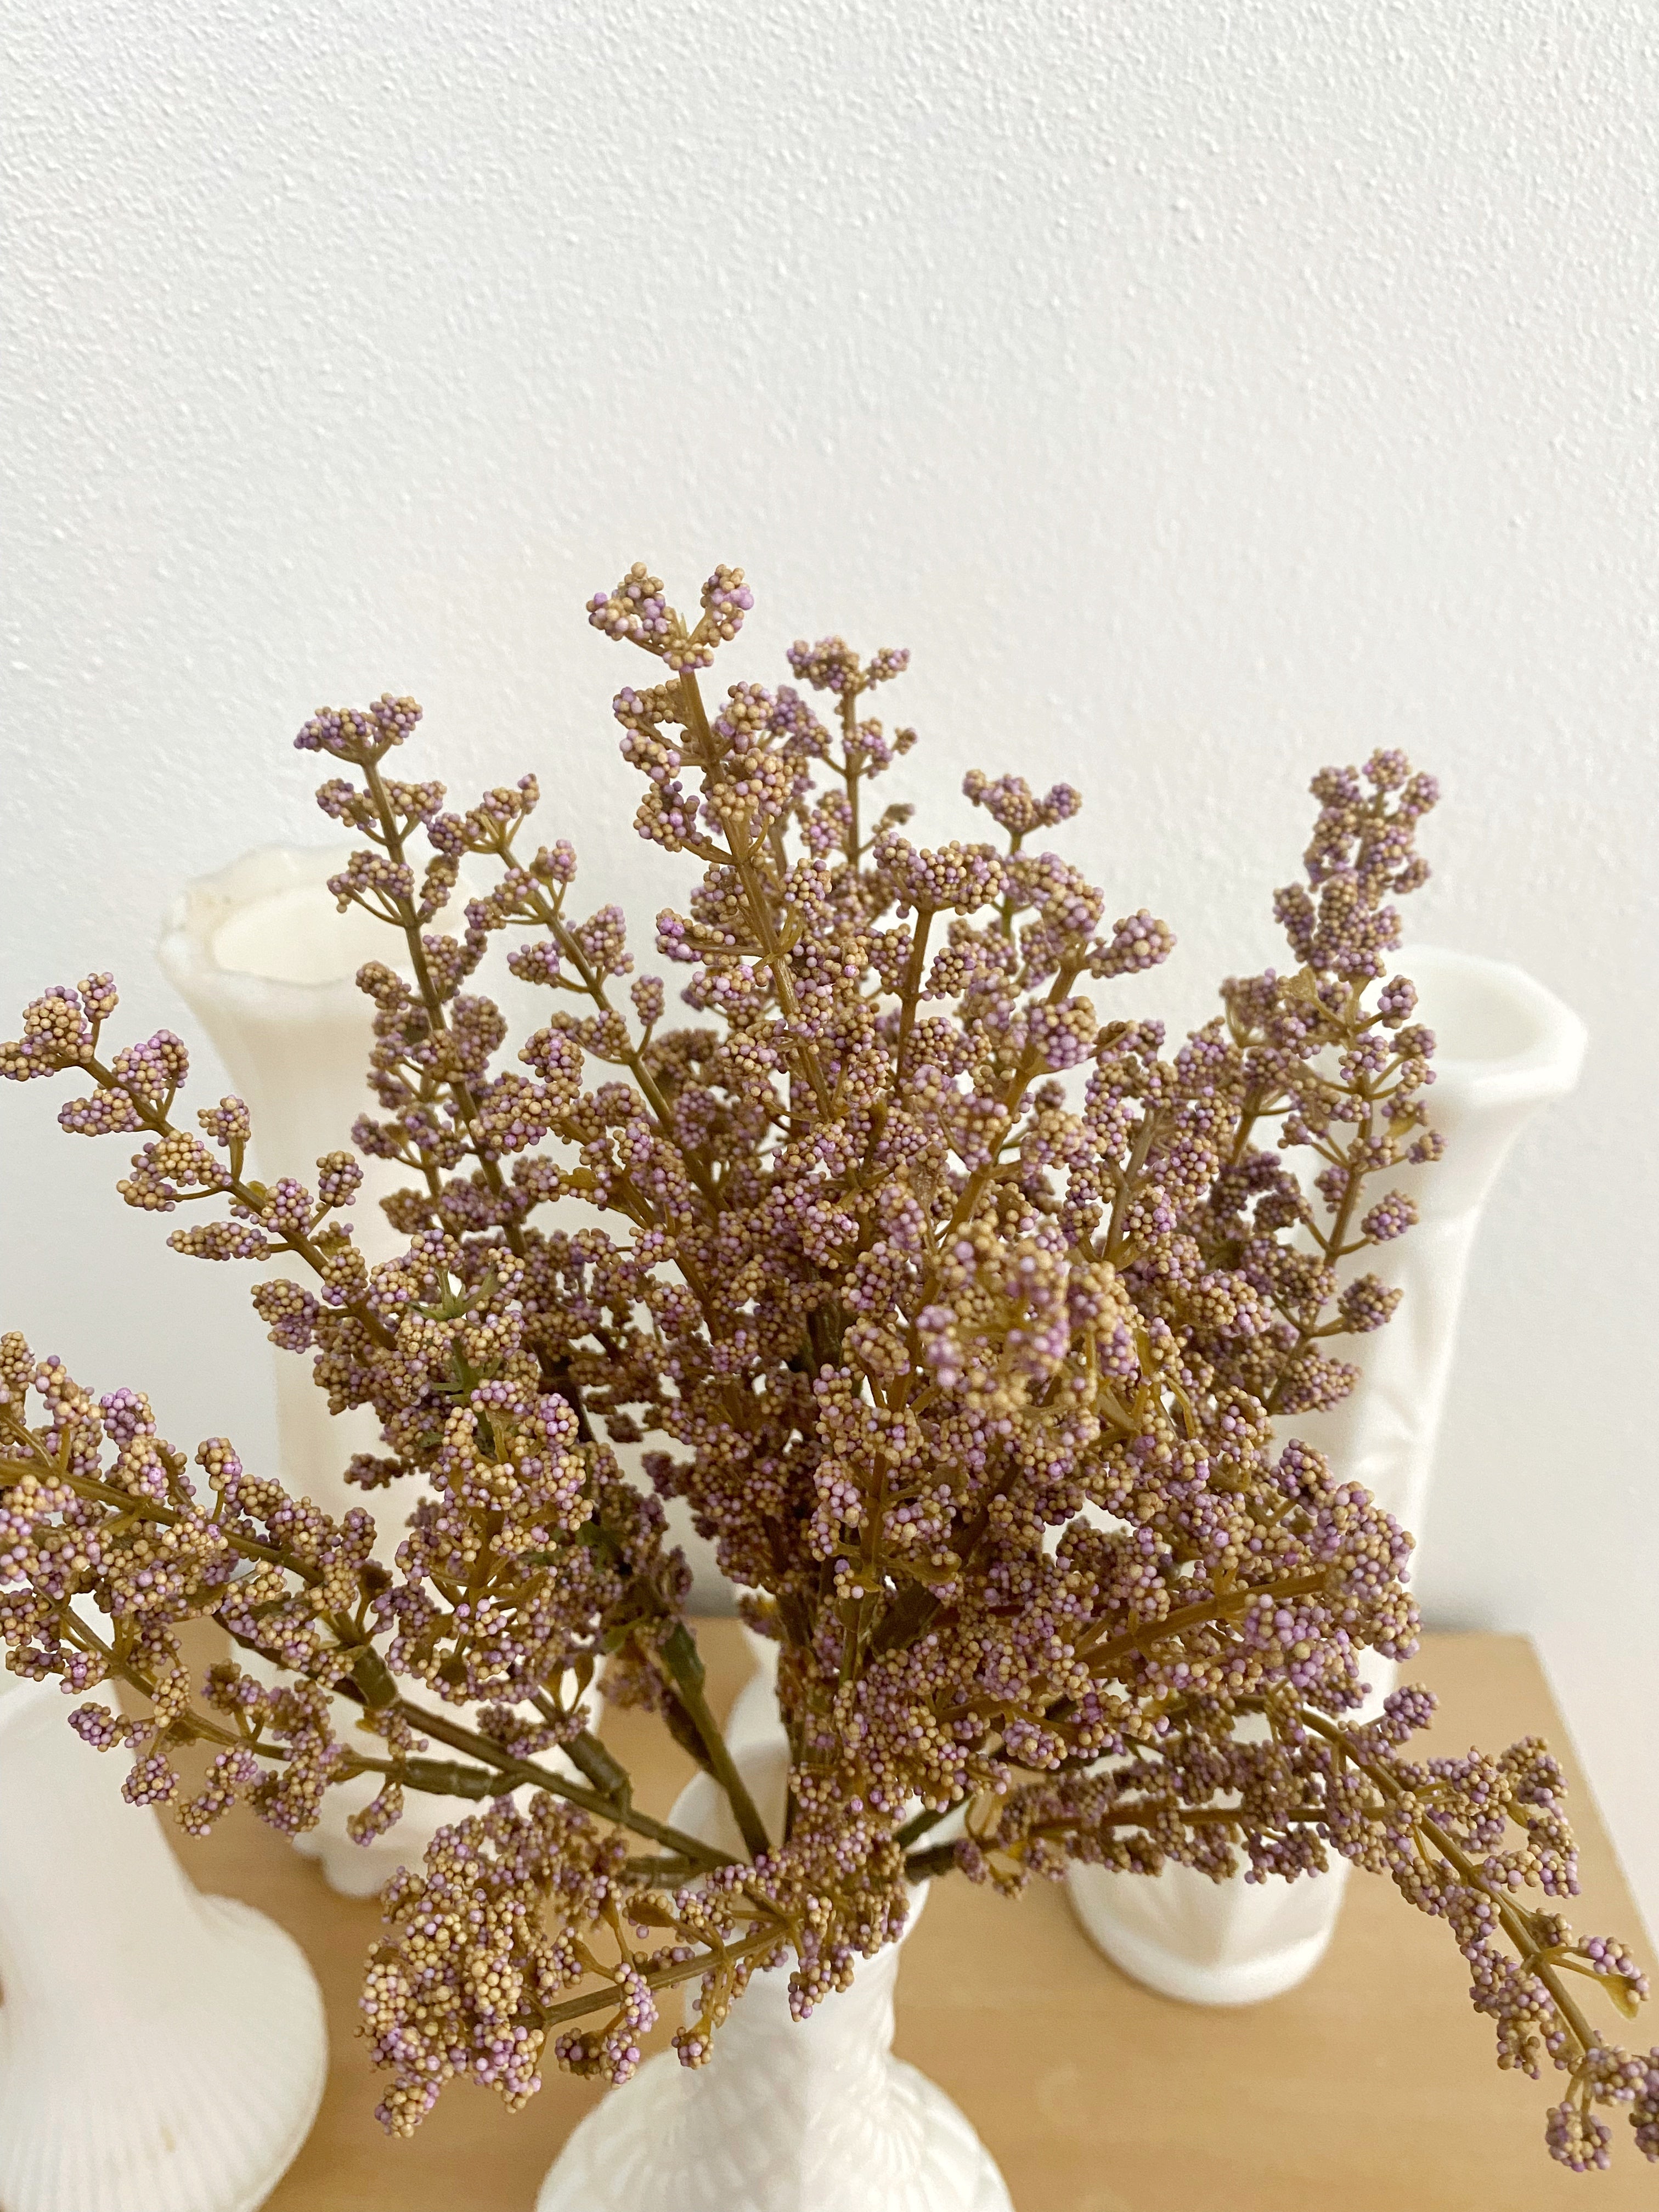 Gypsophila (Baby's Breath) - 15 inches - Oh! You're Lovely - Sola Wood  Flowers